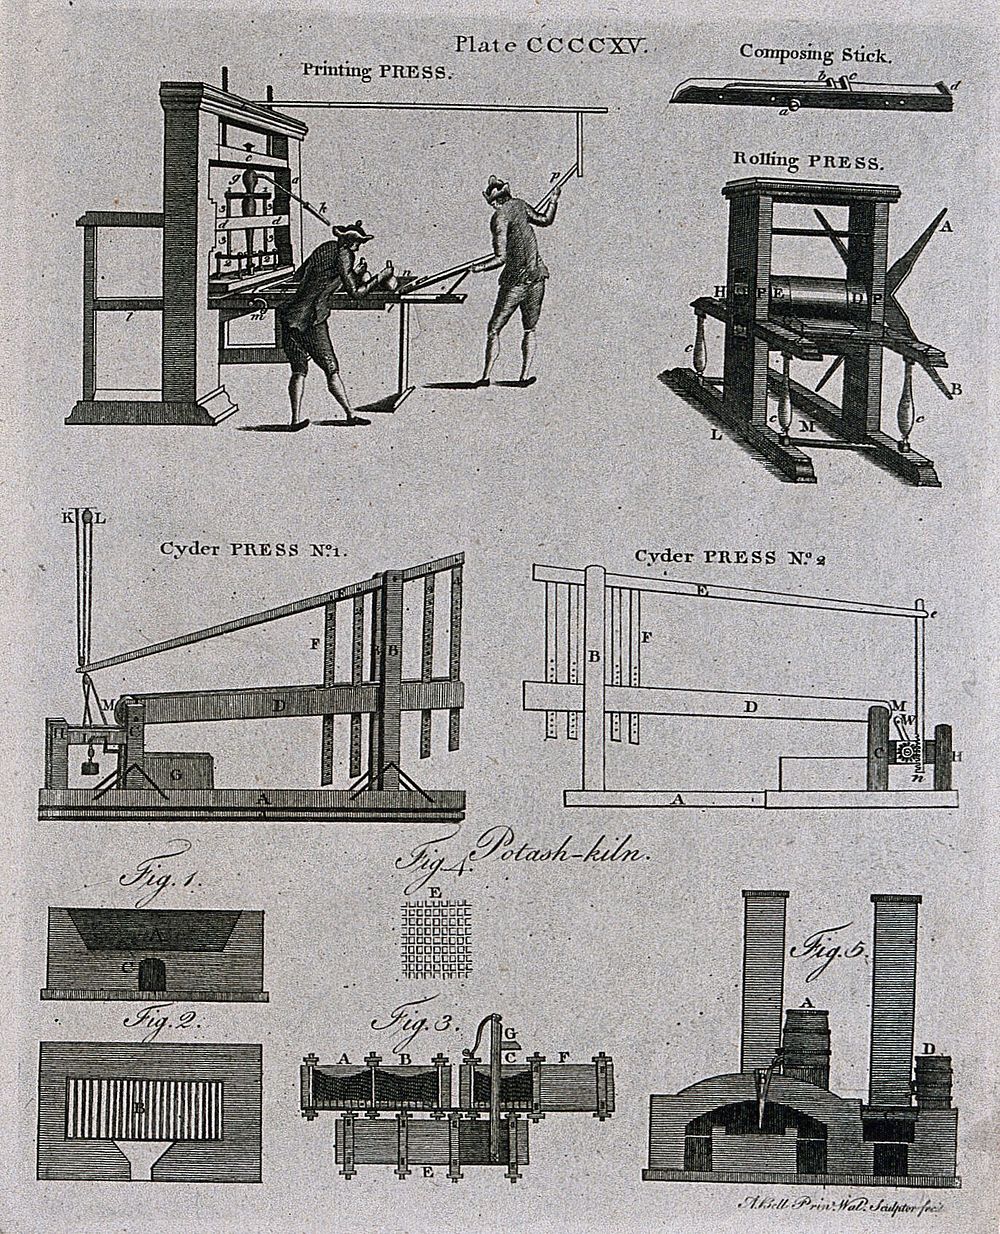 A printing press, rolling press, cider press and potash kiln with constituent parts. Engraving by A. Bell.